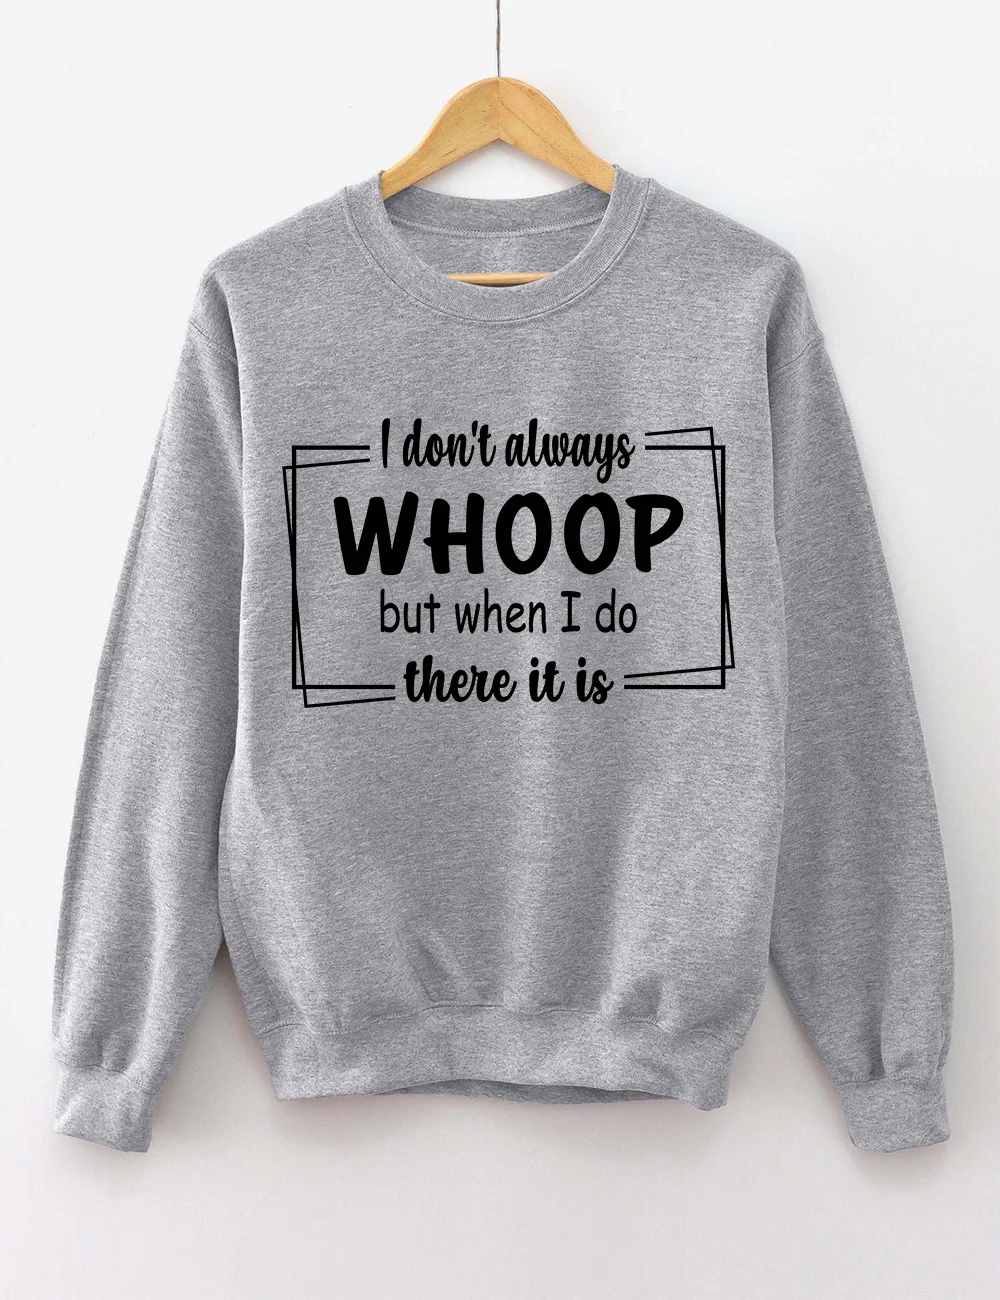 I Don't Always Whoop But When I Do There It Is Sweatshirt